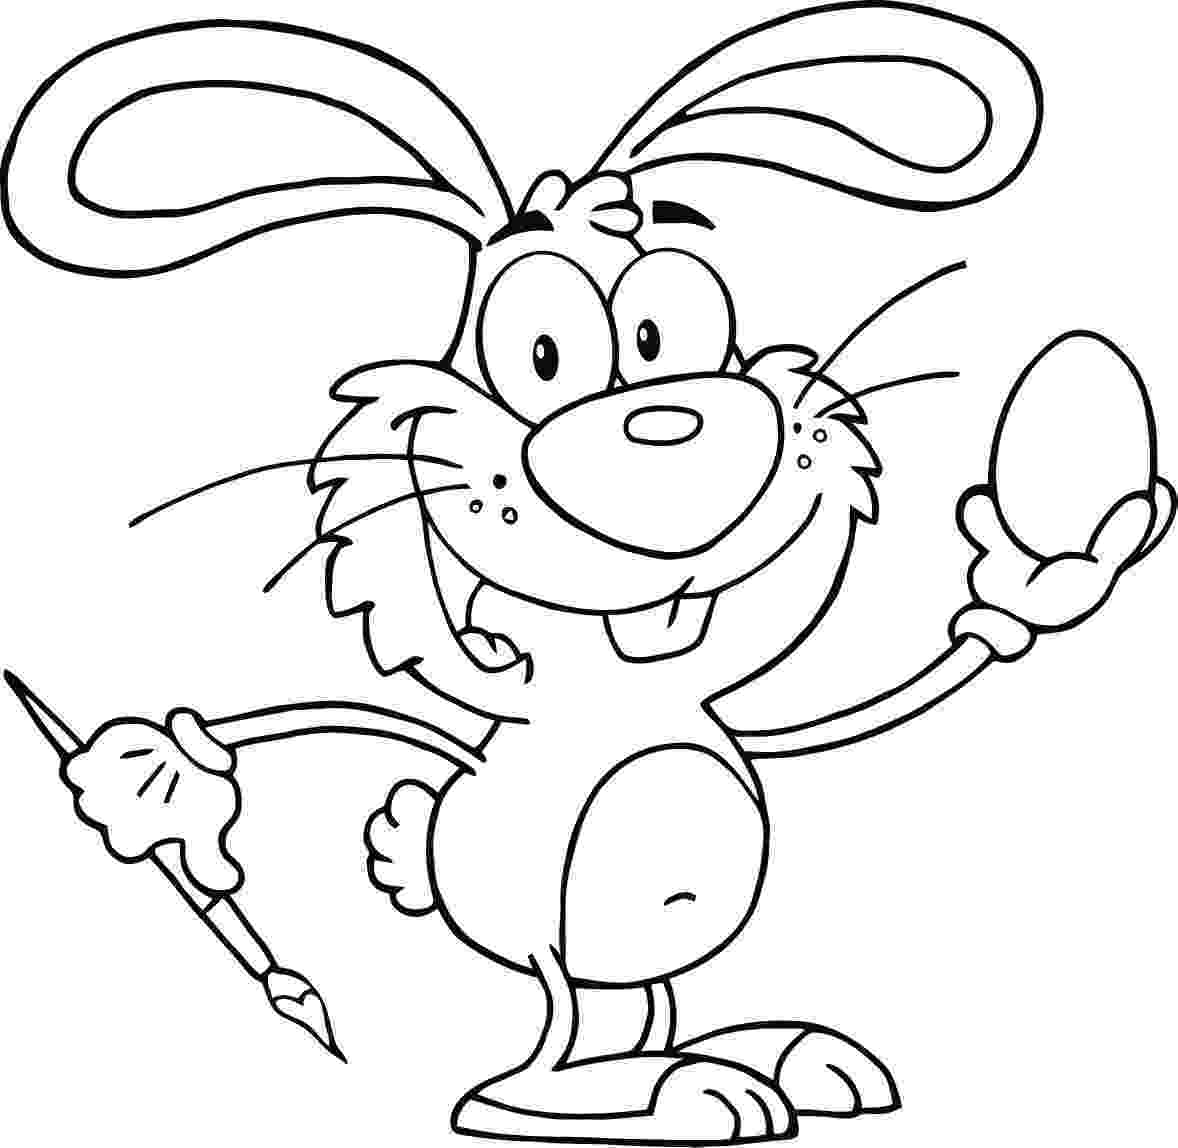 images of rabbits to color free rabbit coloring pages color images to of rabbits 